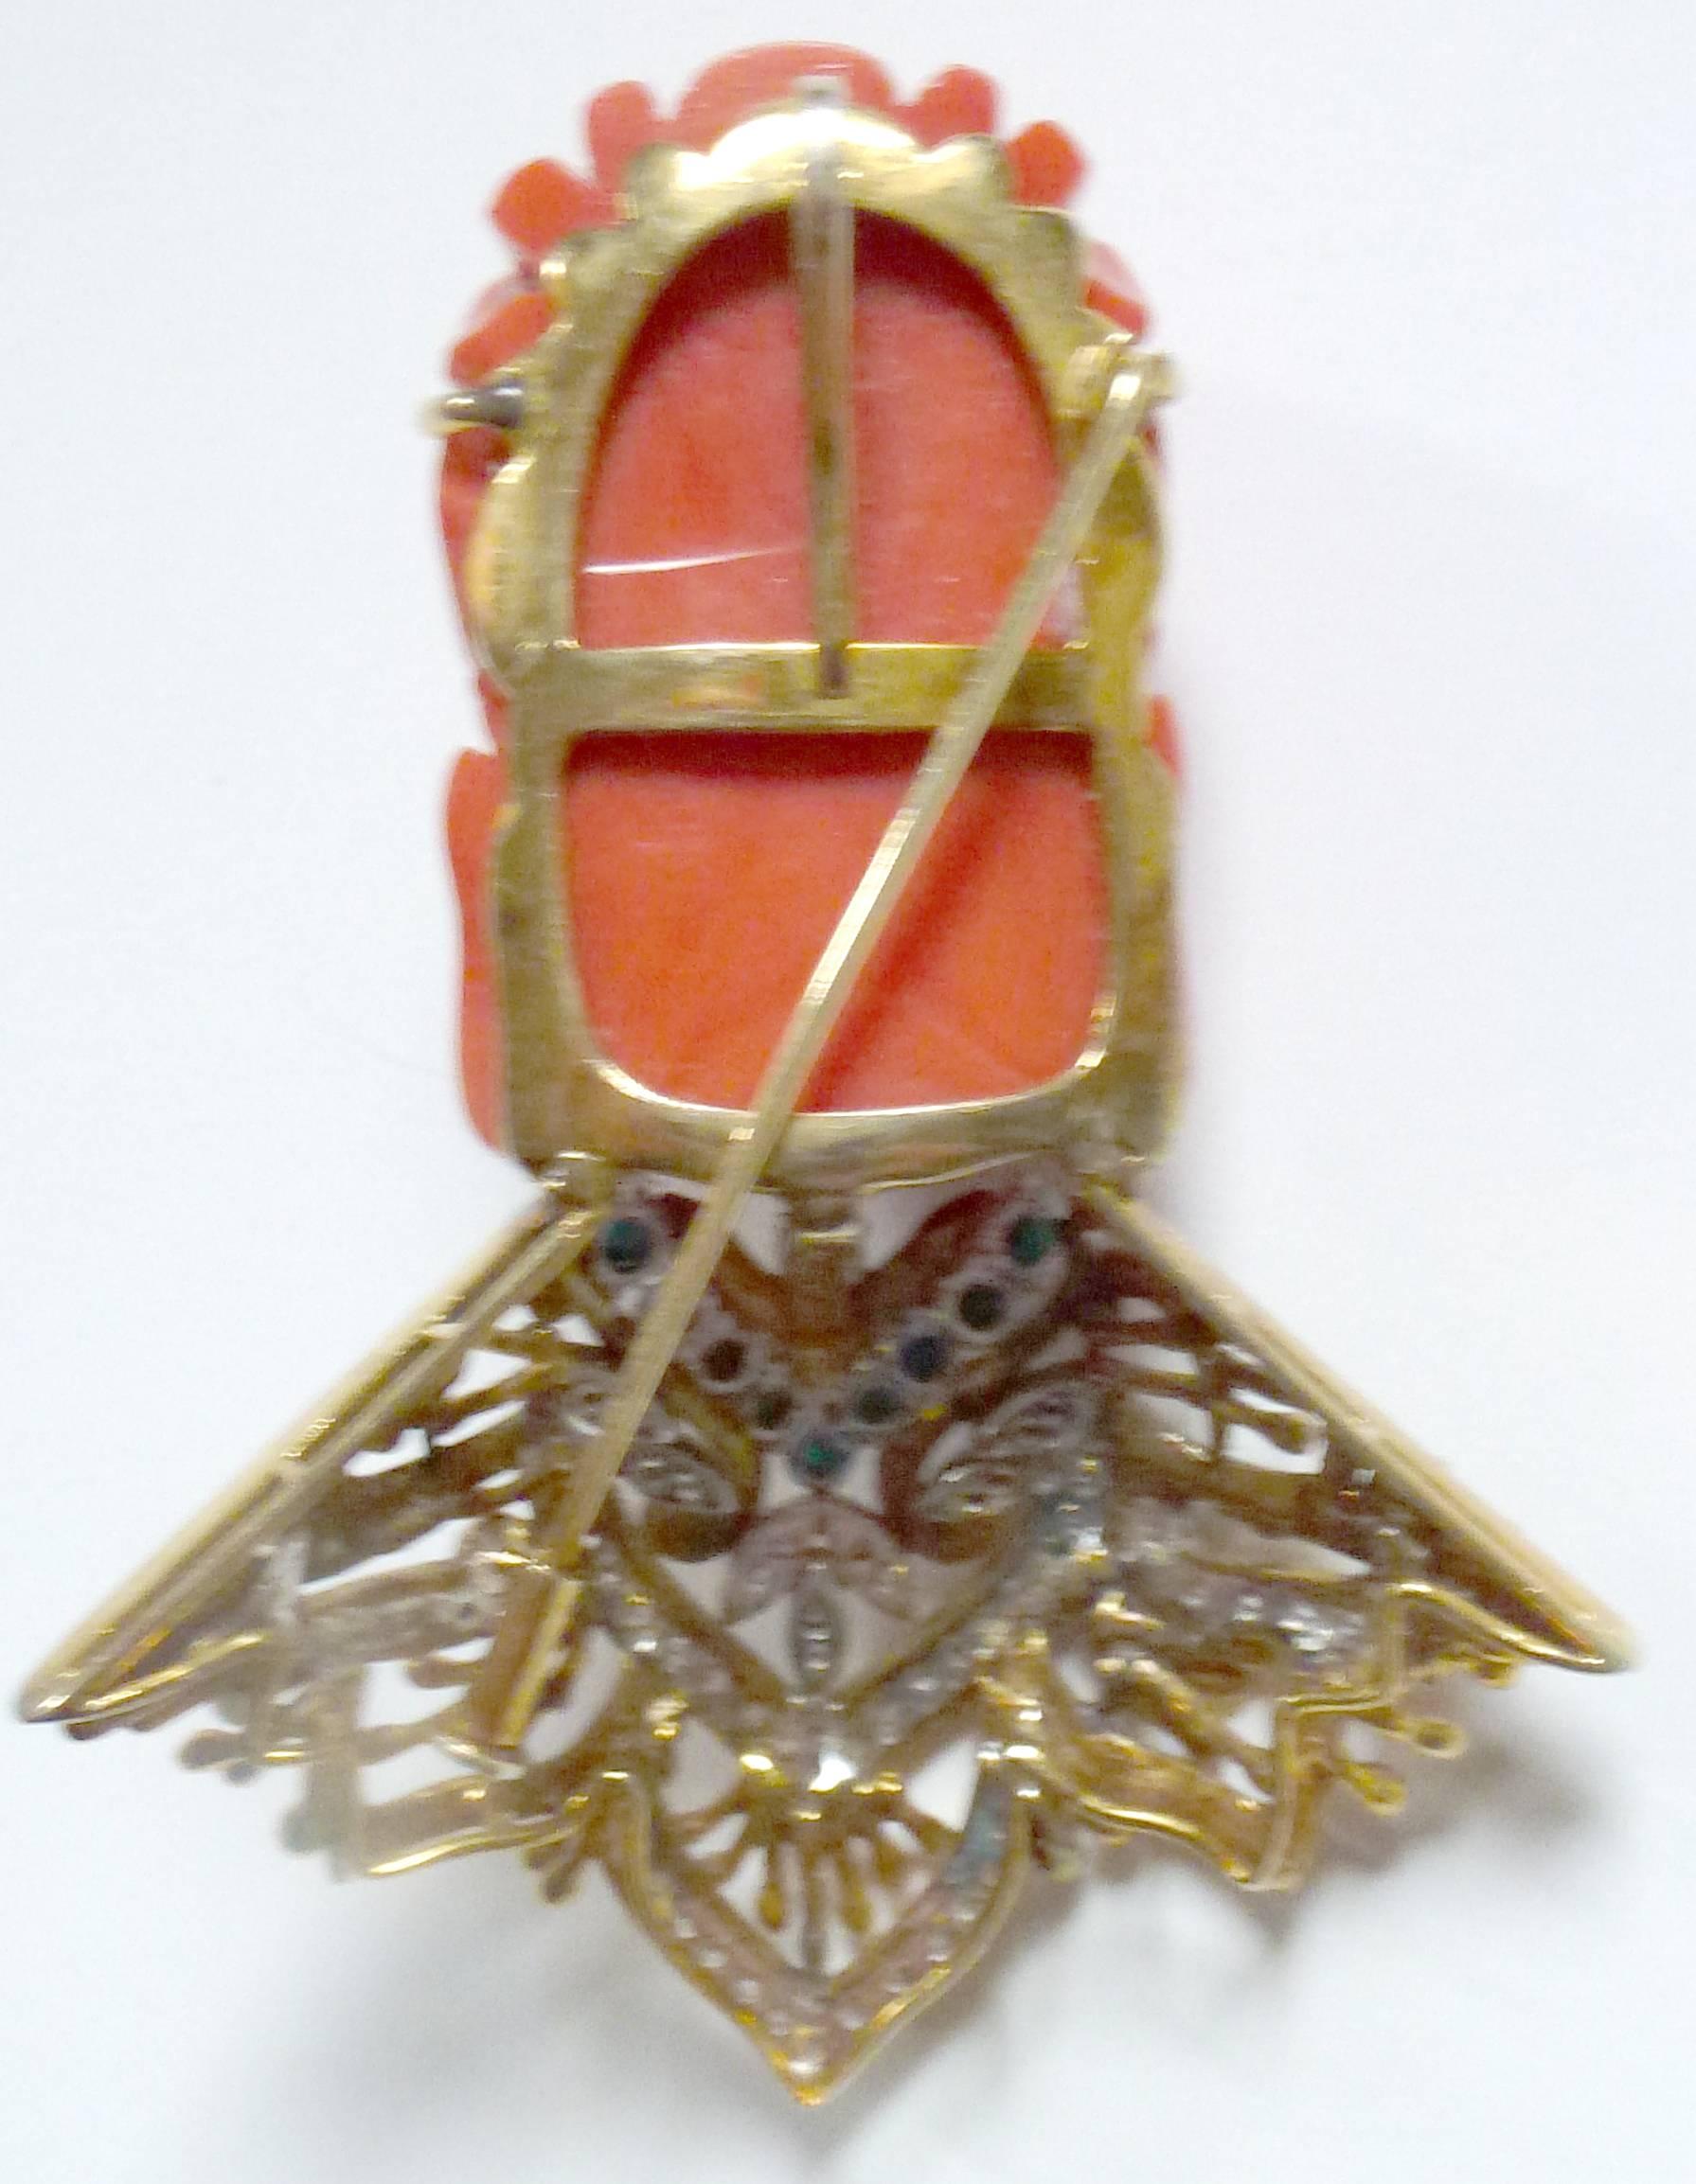 Kenneth H. Carved coral, diamond and 18-karat gold convertible brooch , the 18-karat frame set with the large carved figural head of a Buddha or Guanyin carved in red coral, the forehead inset with six diamonds forming hairband, one diamond between